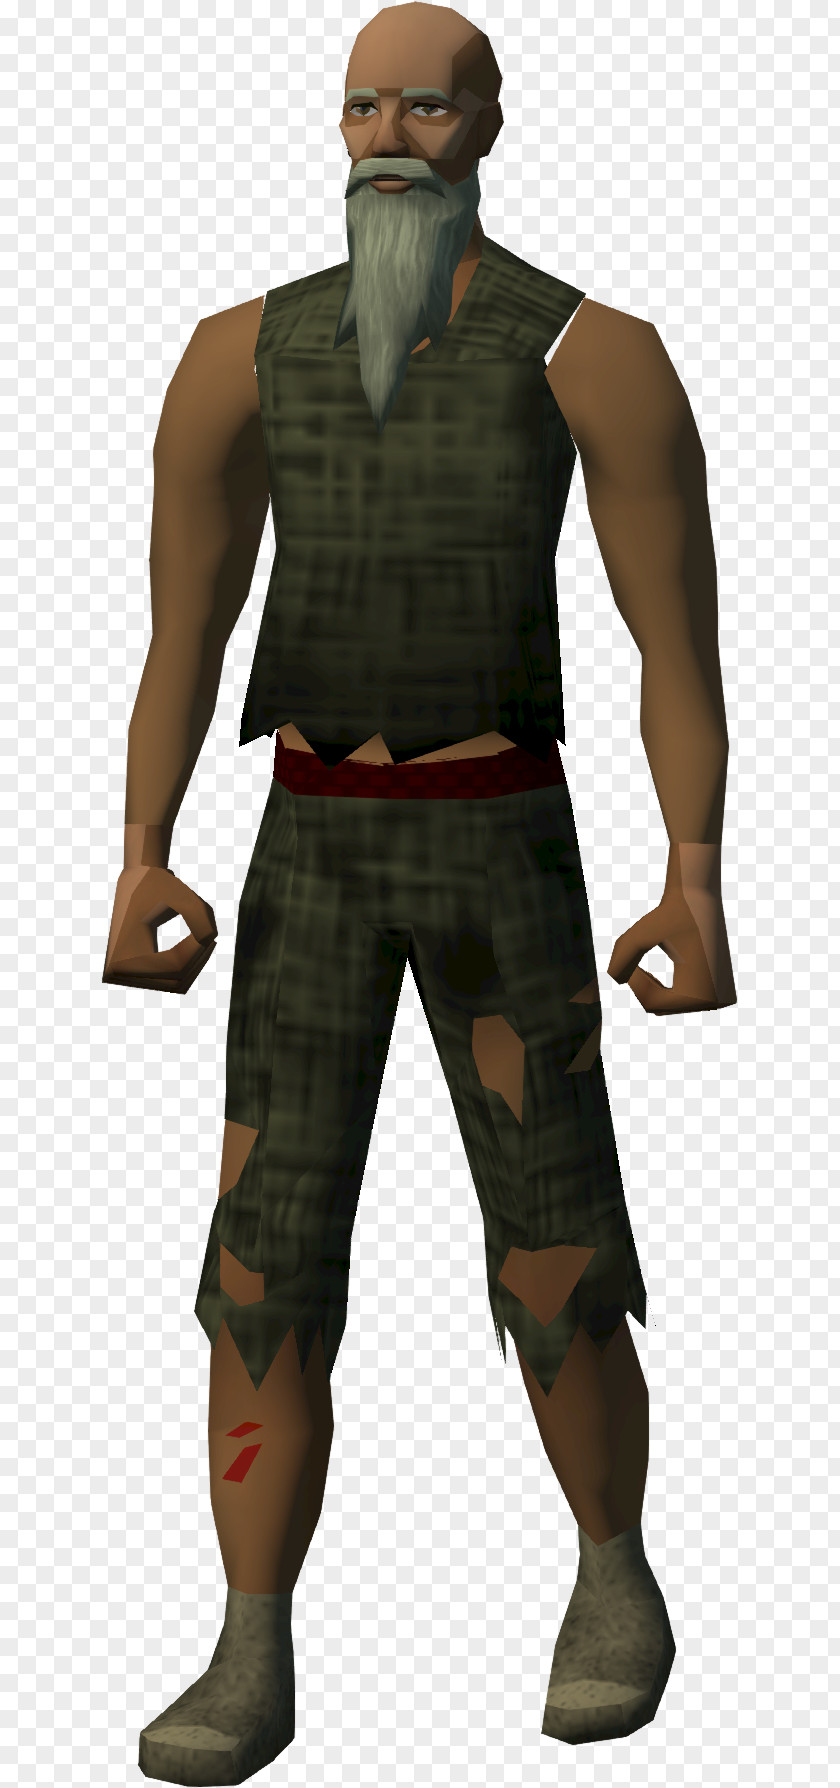 OLD MAN RuneScape Wikia Man PNG